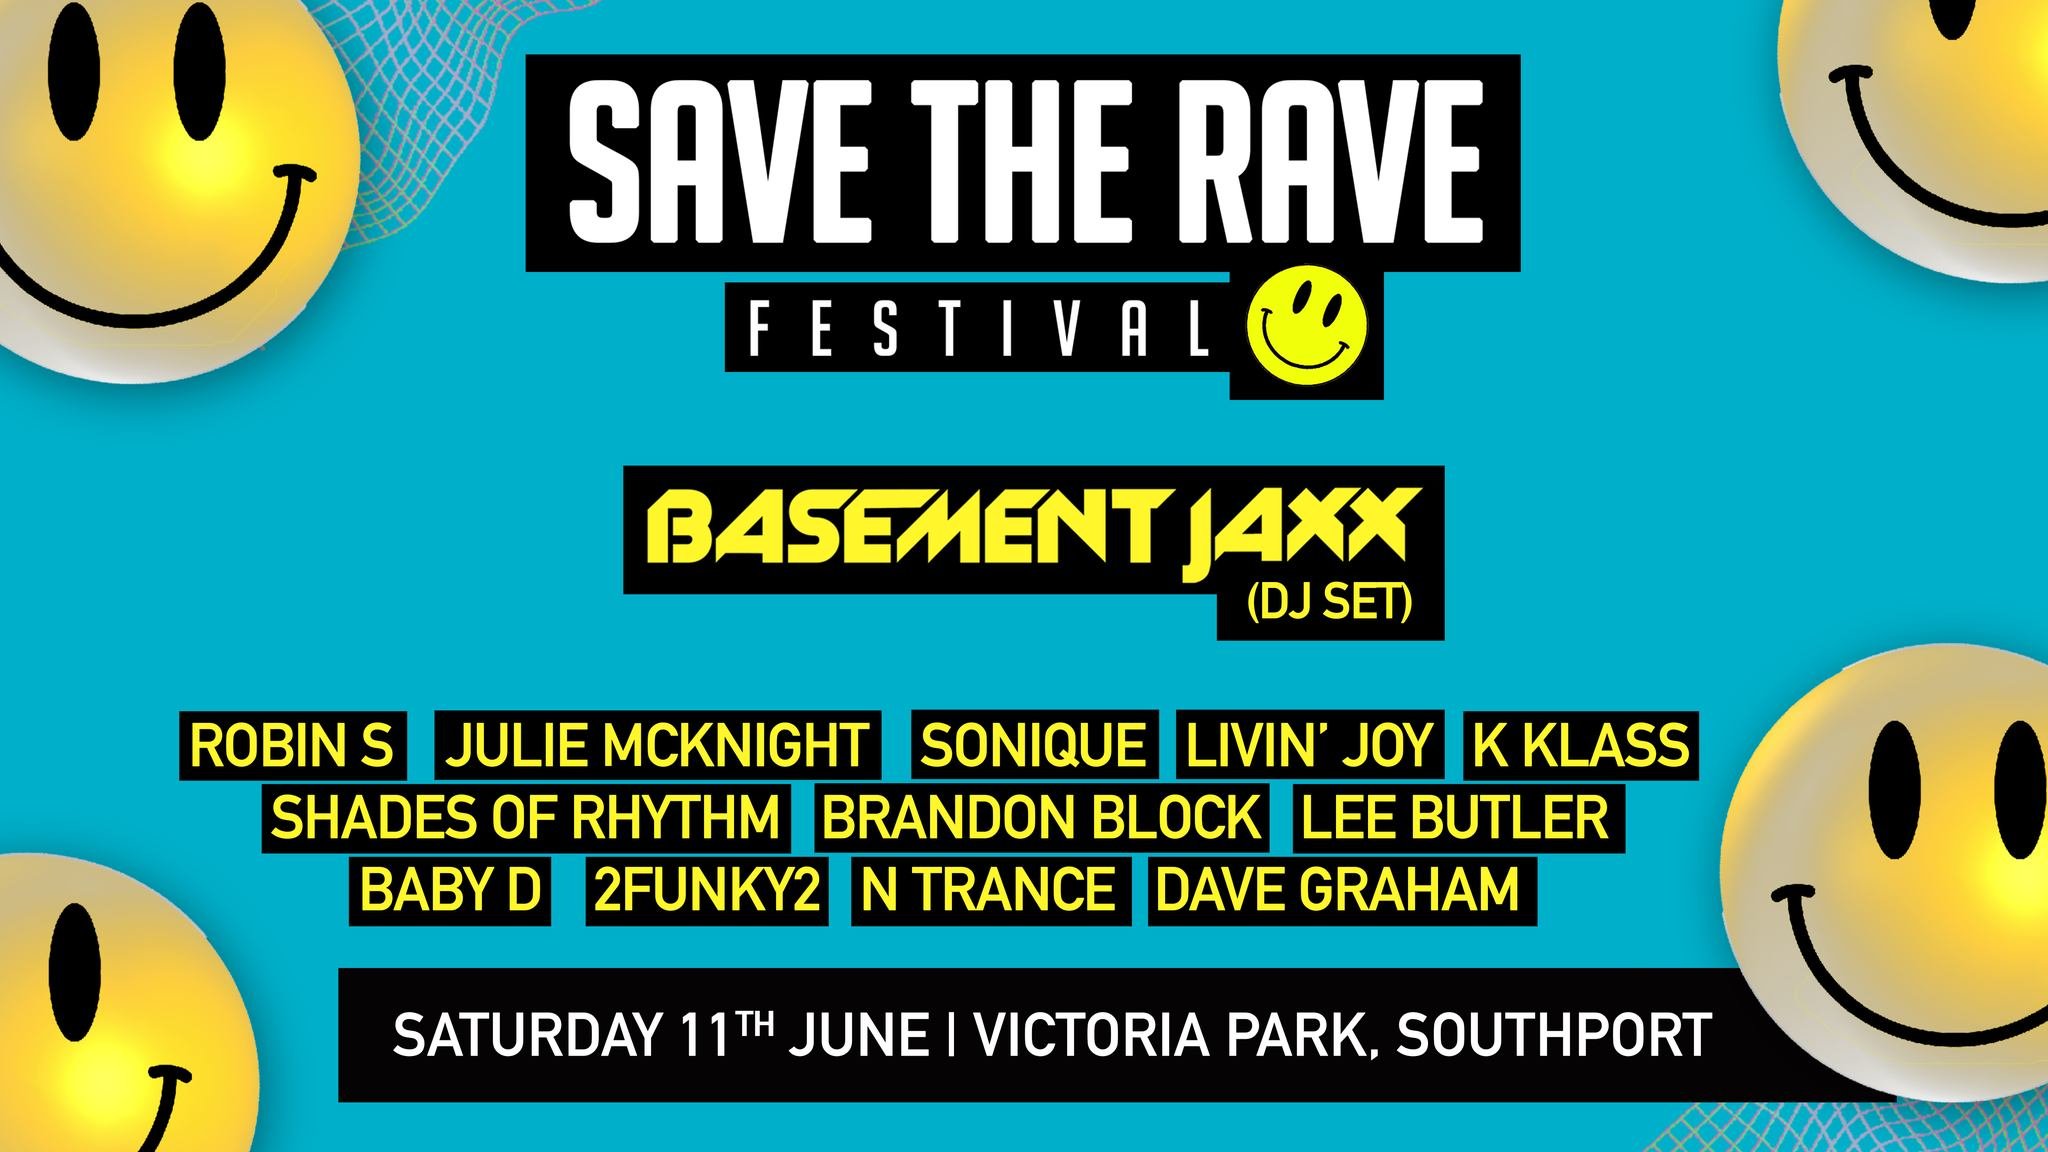 Save The Rave, Outdoor 90's Festival